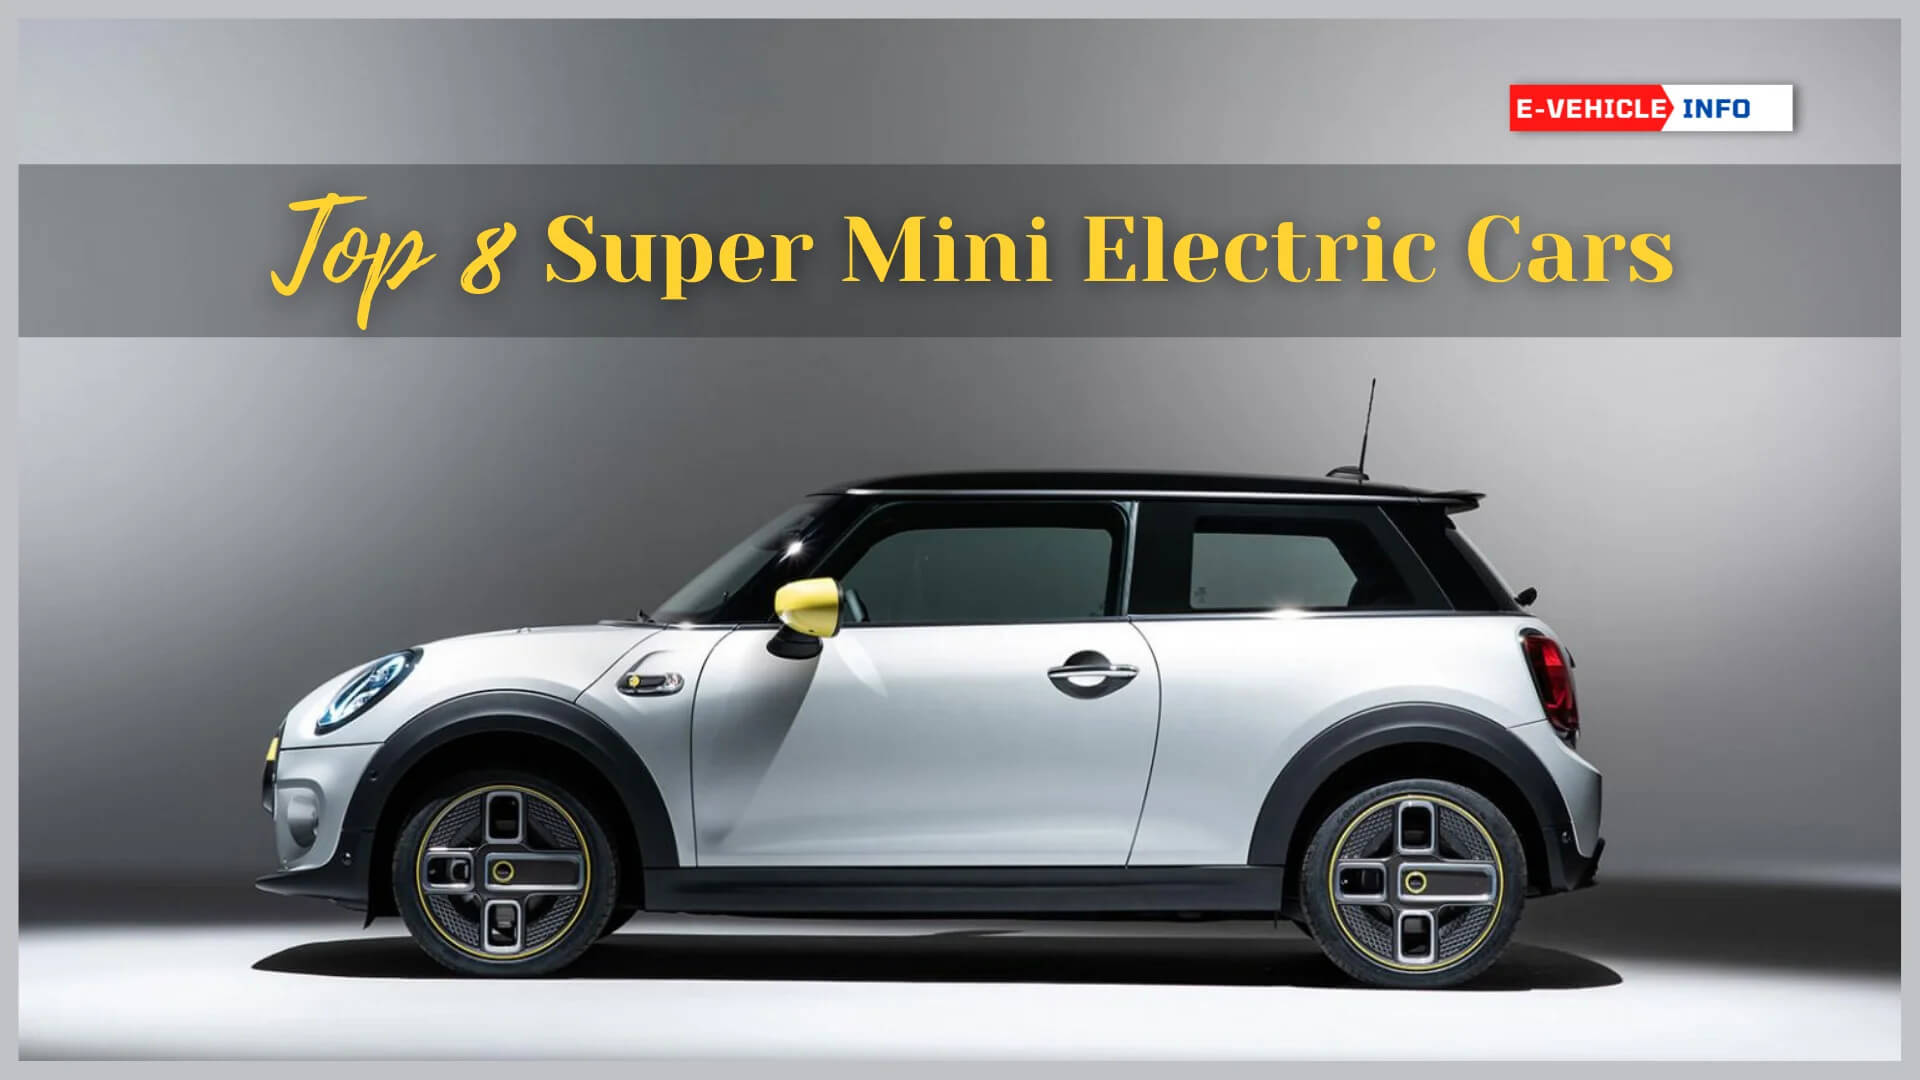 https://e-vehicleinfo.com/super-mini-electric-cars-most-powerful-and-cheapest/